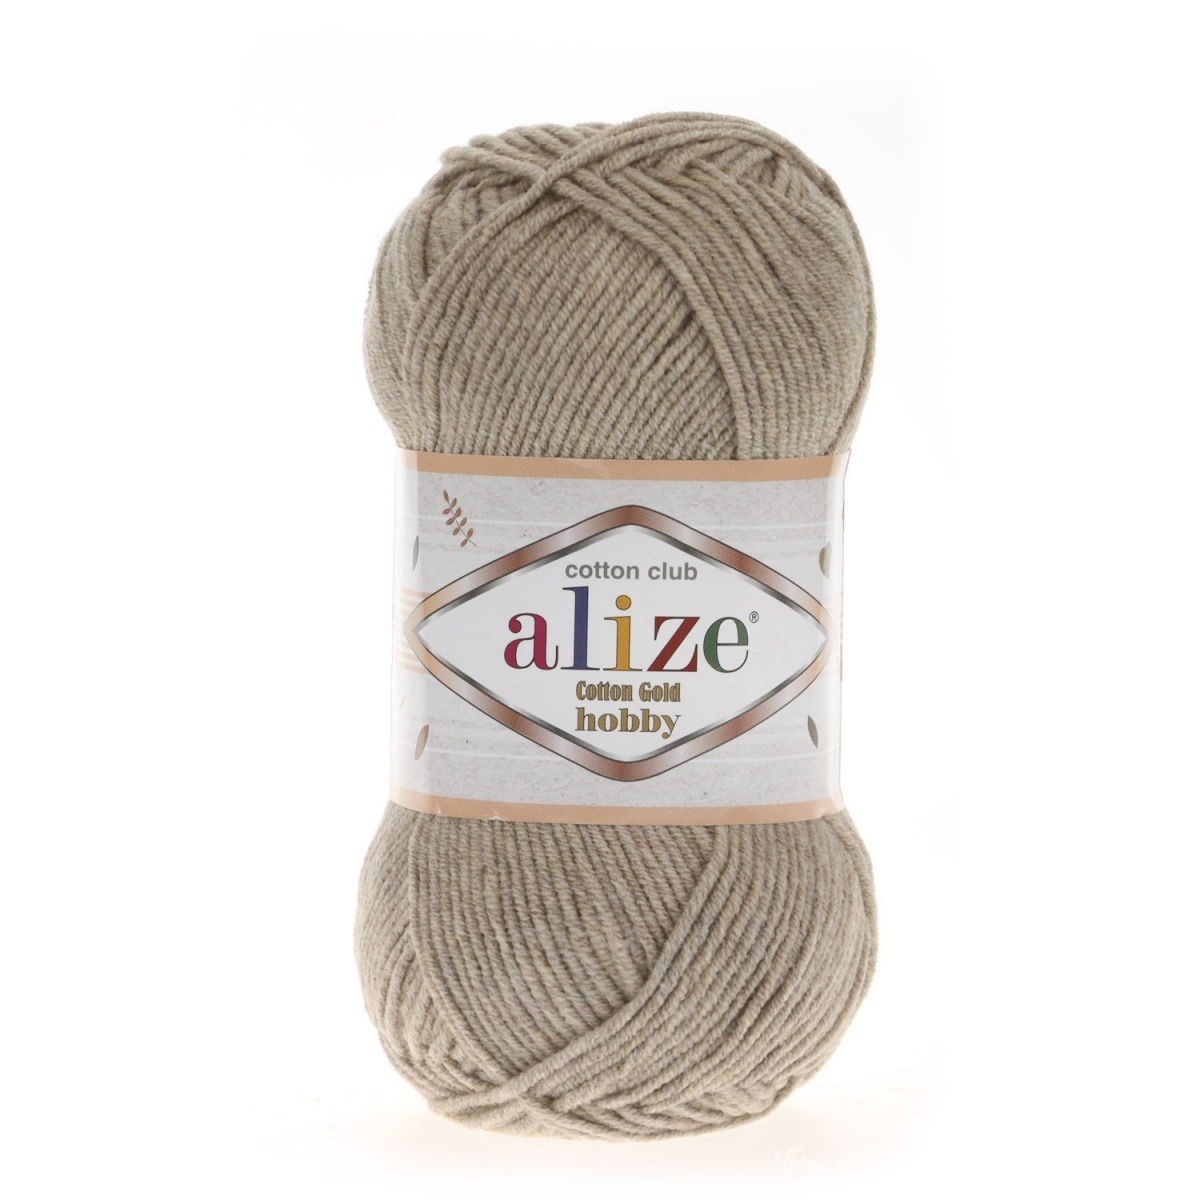 Alize "Cotton gold hobby" (152)